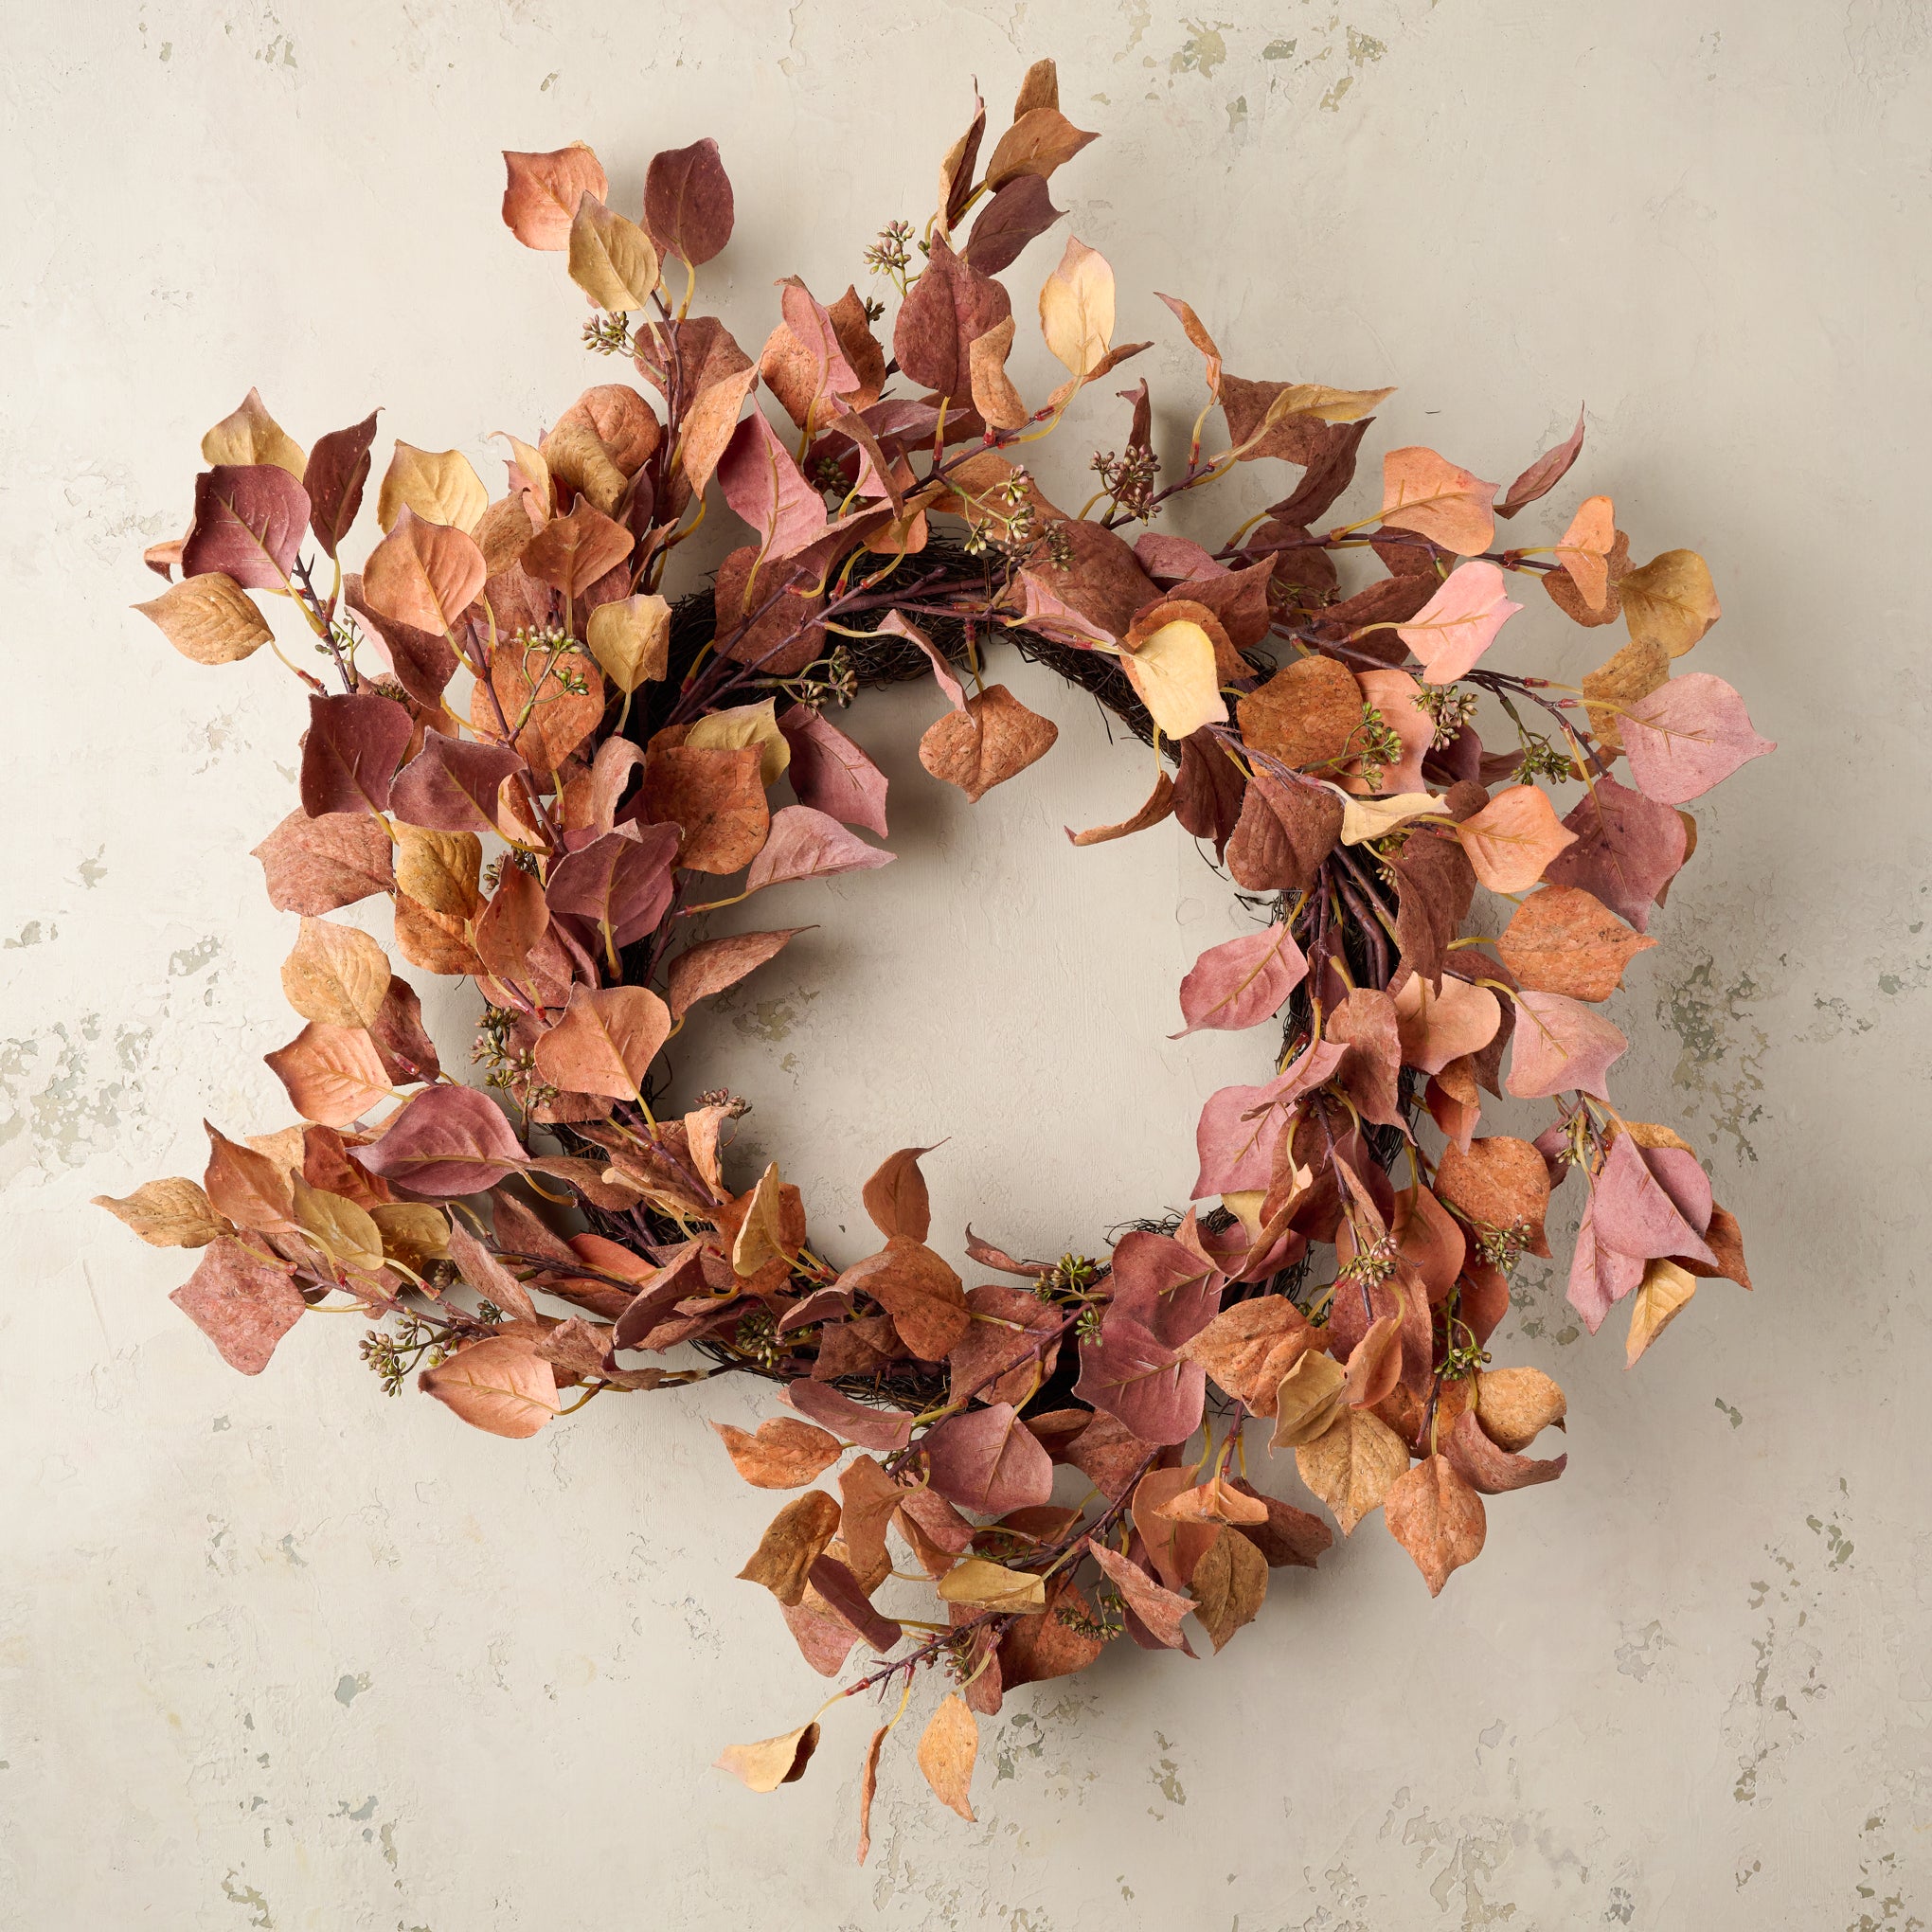 Mustard and Orange Silver Dollar Eucalyptus Wreath On sale for $44.80, discounted from $64.00